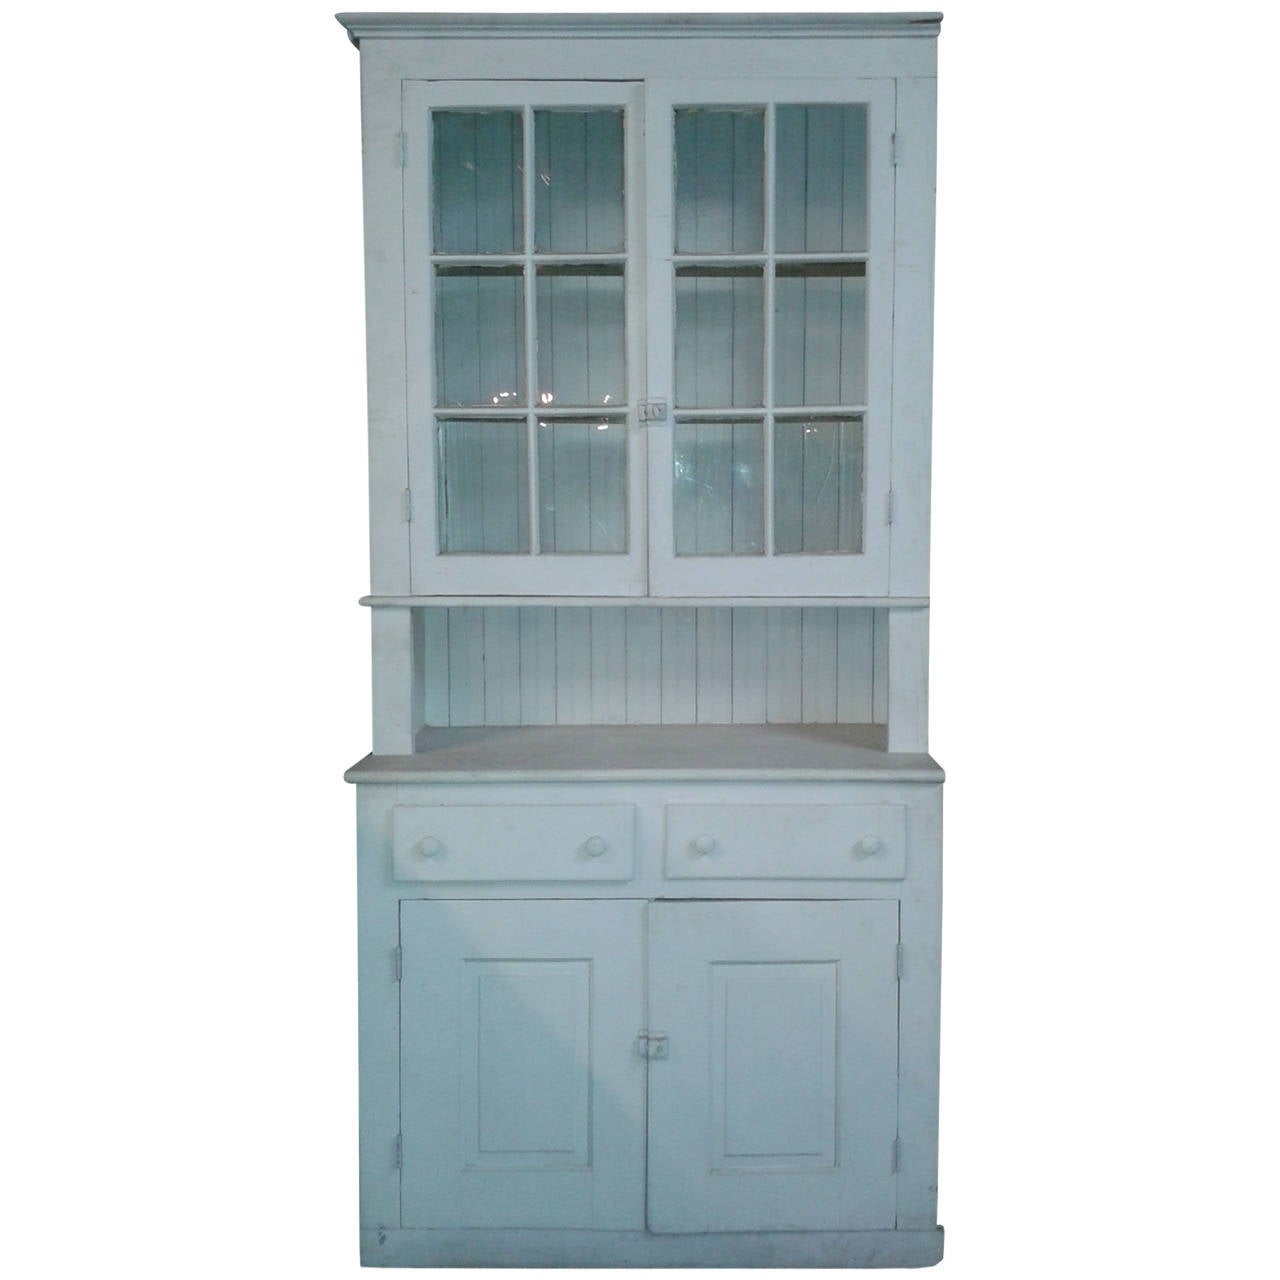 1905 White Kitchen Cabinet with Original Hardware For Sale